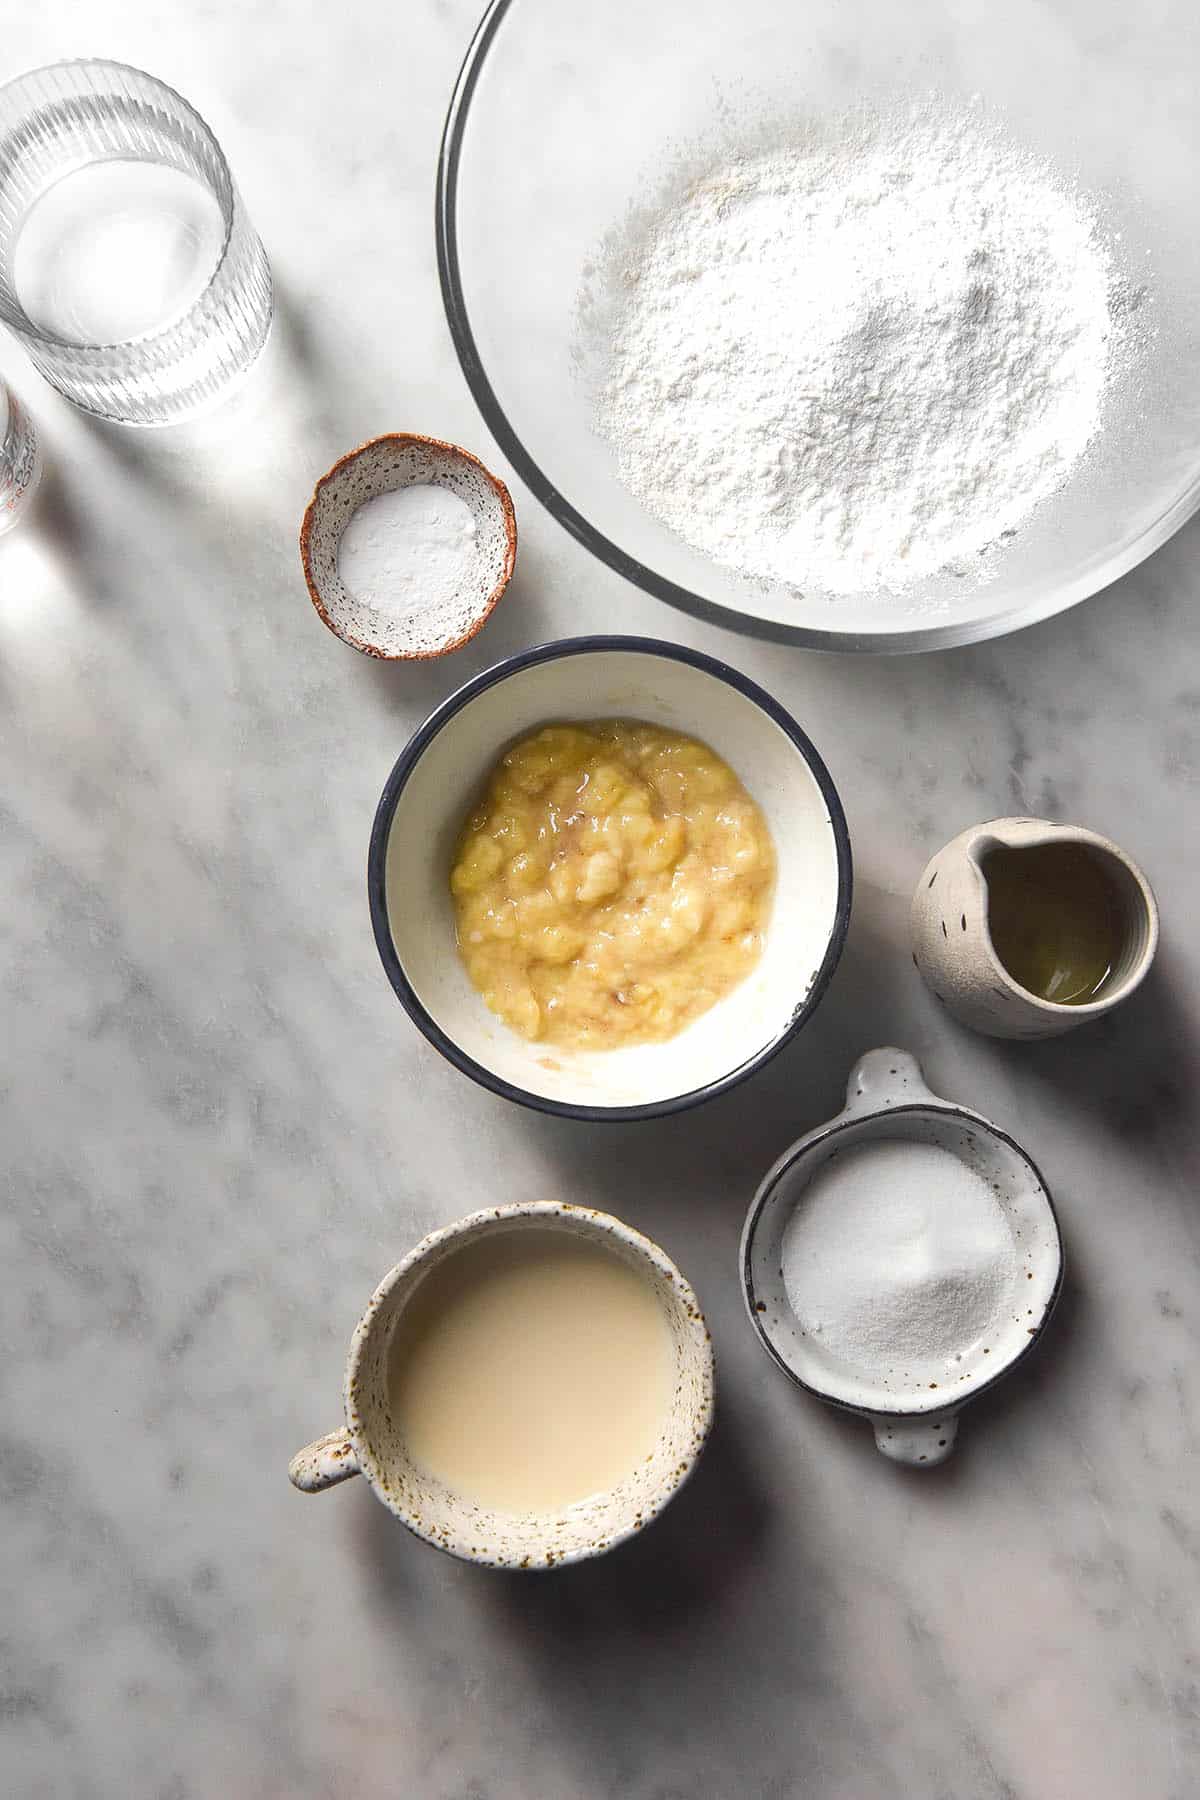 An aerial image of the ingredients used to make gluten free banana pancakes. The ingredients sit in various sized bowls on a white marble table.